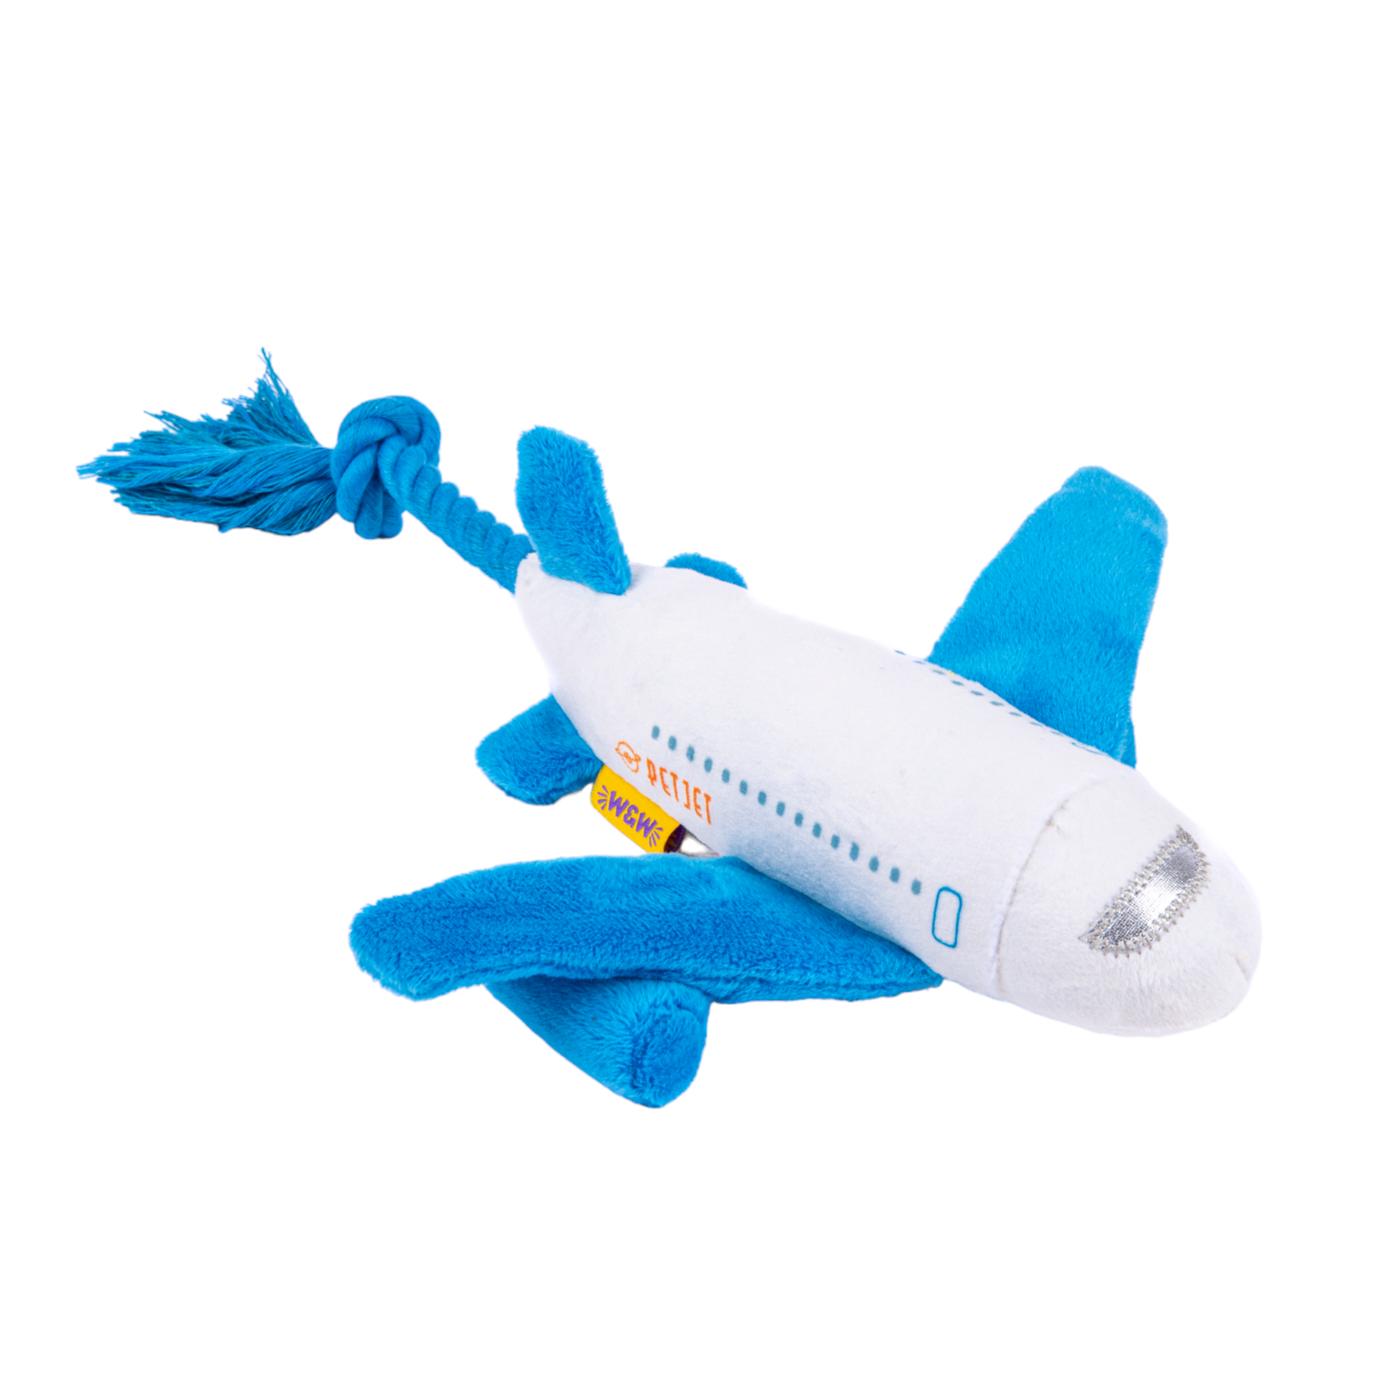 Woof & Whiskers Plush Dog Toy - Airplane; image 1 of 5